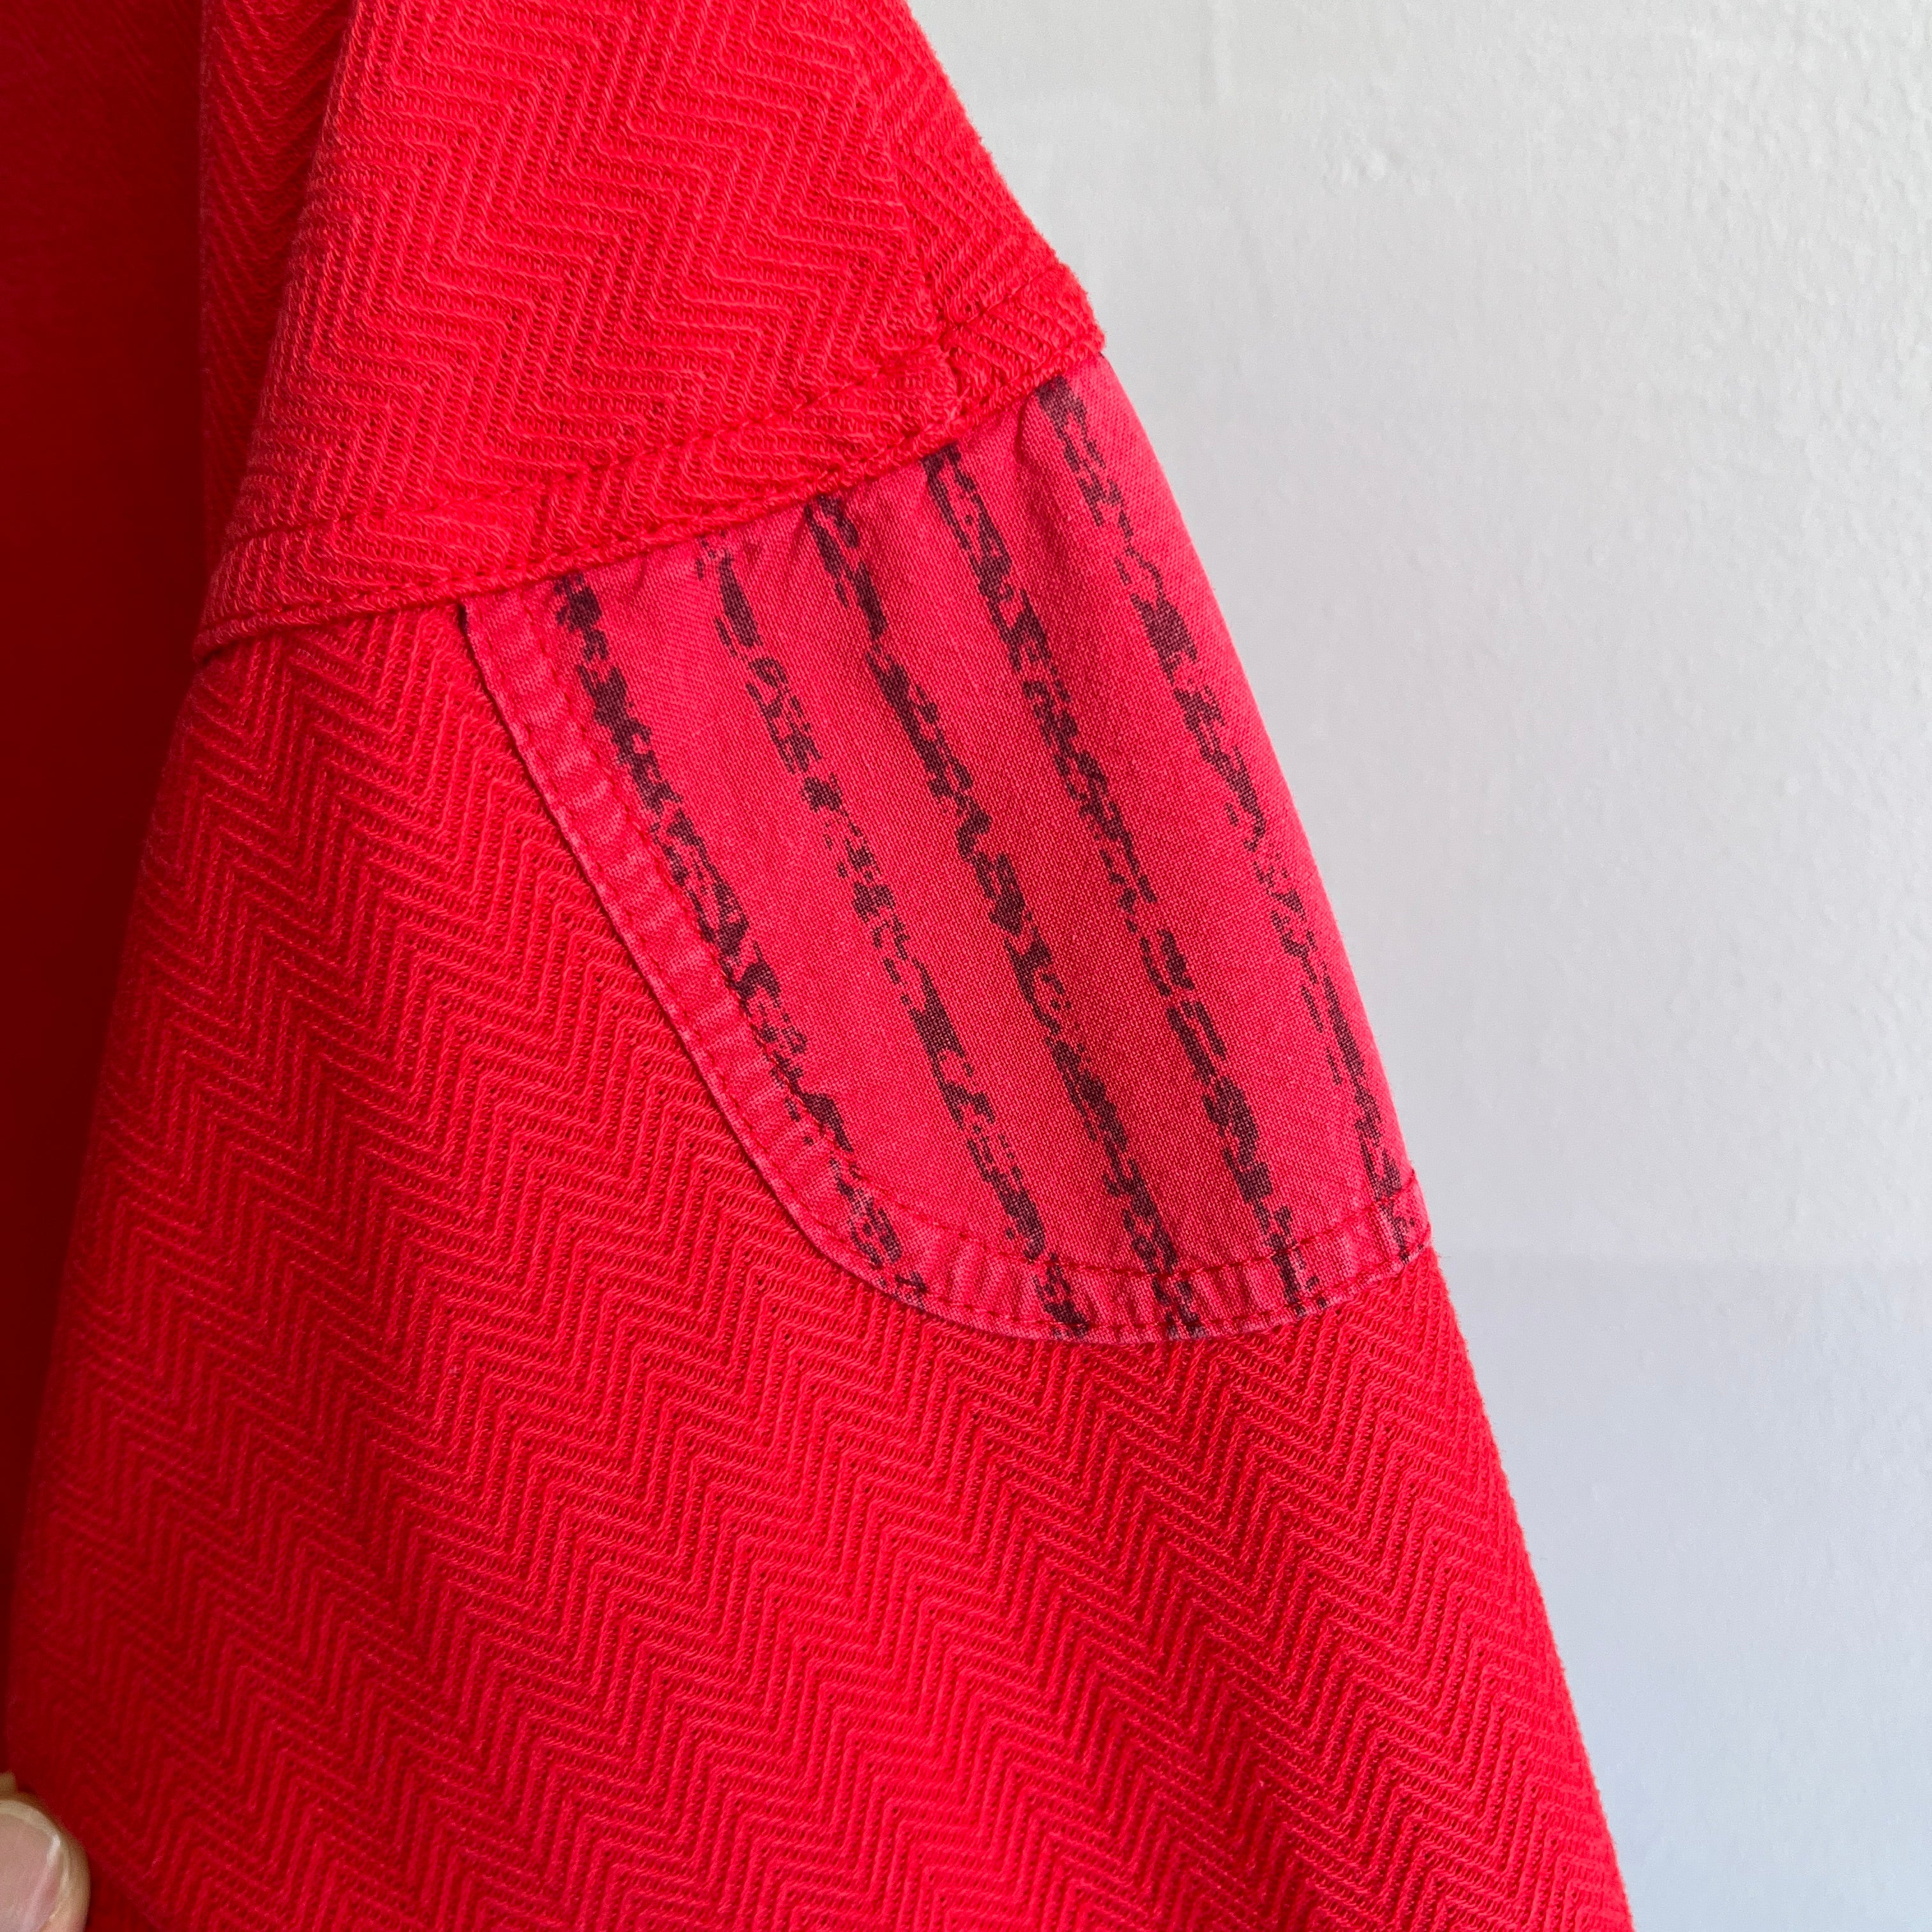 1980s Chevron Striped Double Chested Buttoned Super Cool Red Sweatshirt